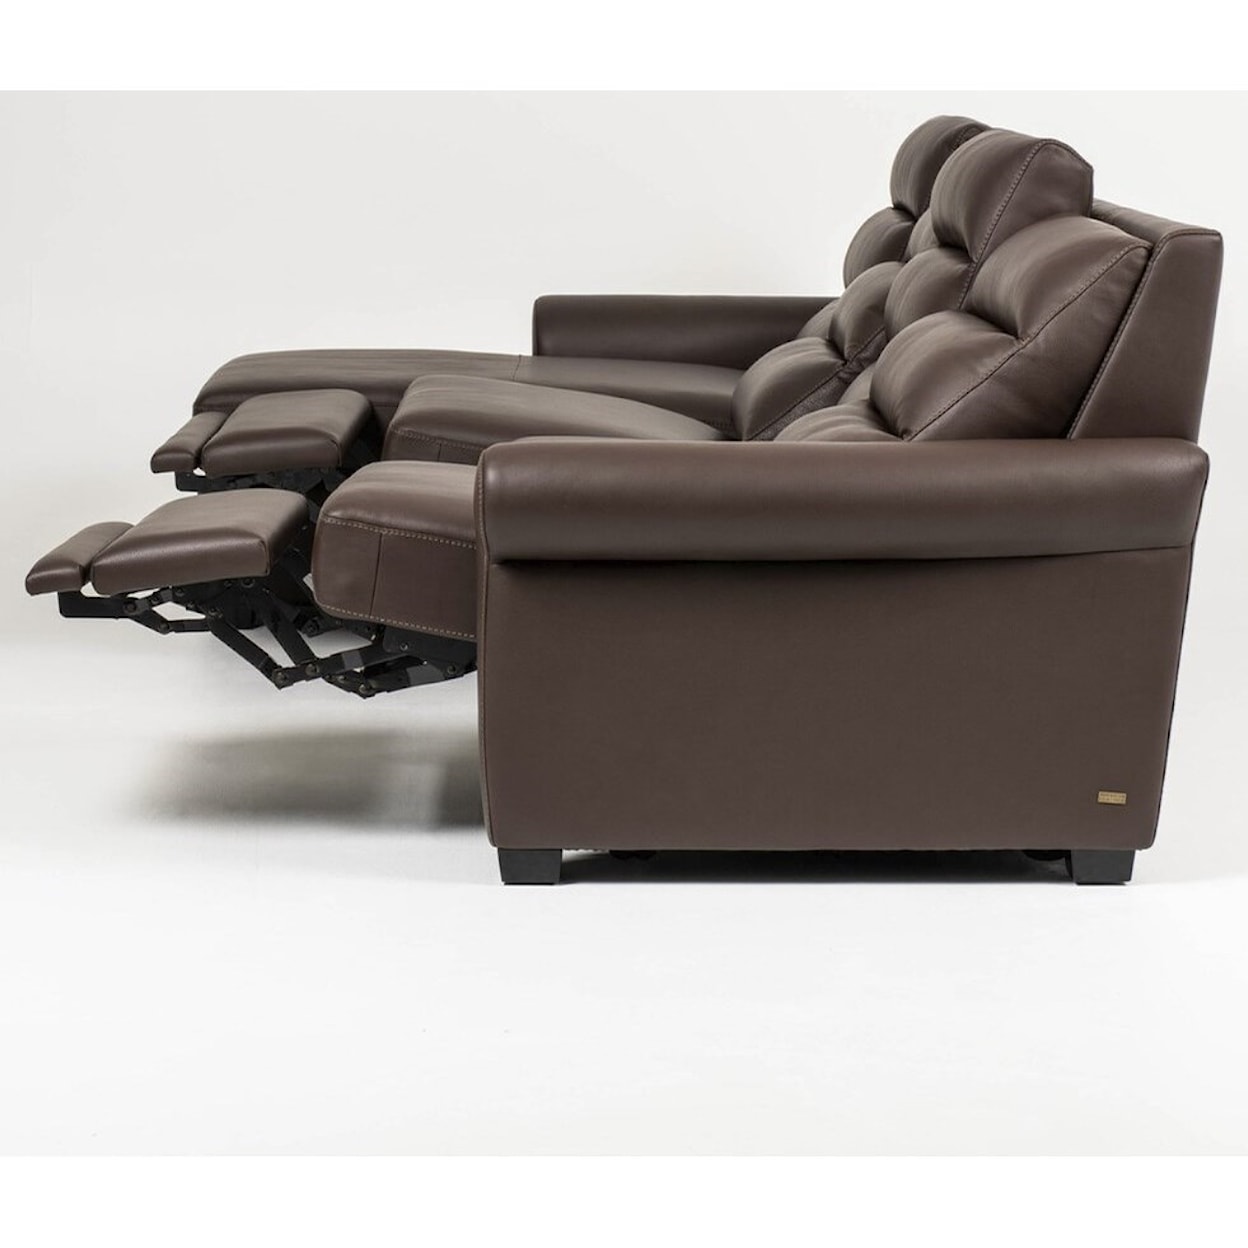 American Leather Austin Power Sofa with Chaise